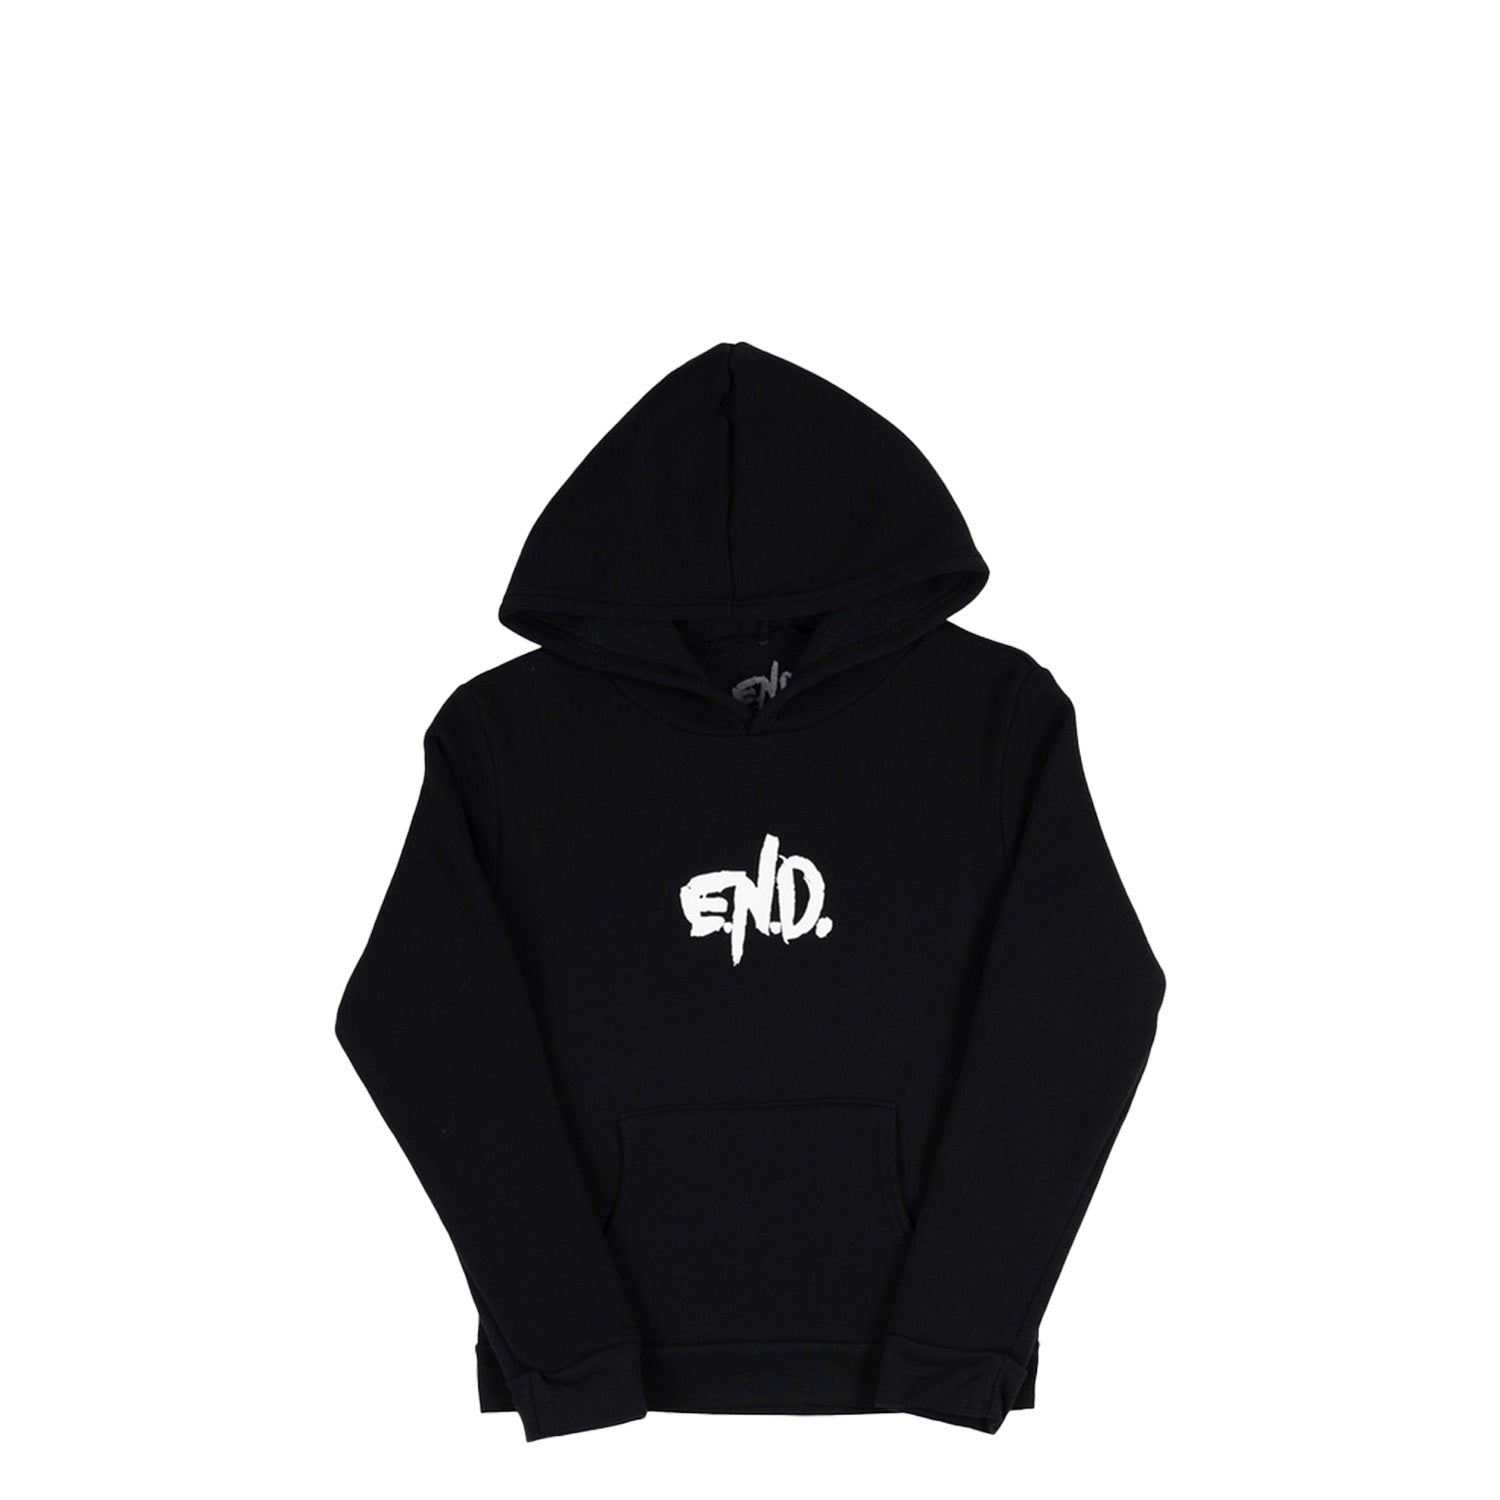 Emo’s Not Dead, Band Merch, Youth END Hoodie